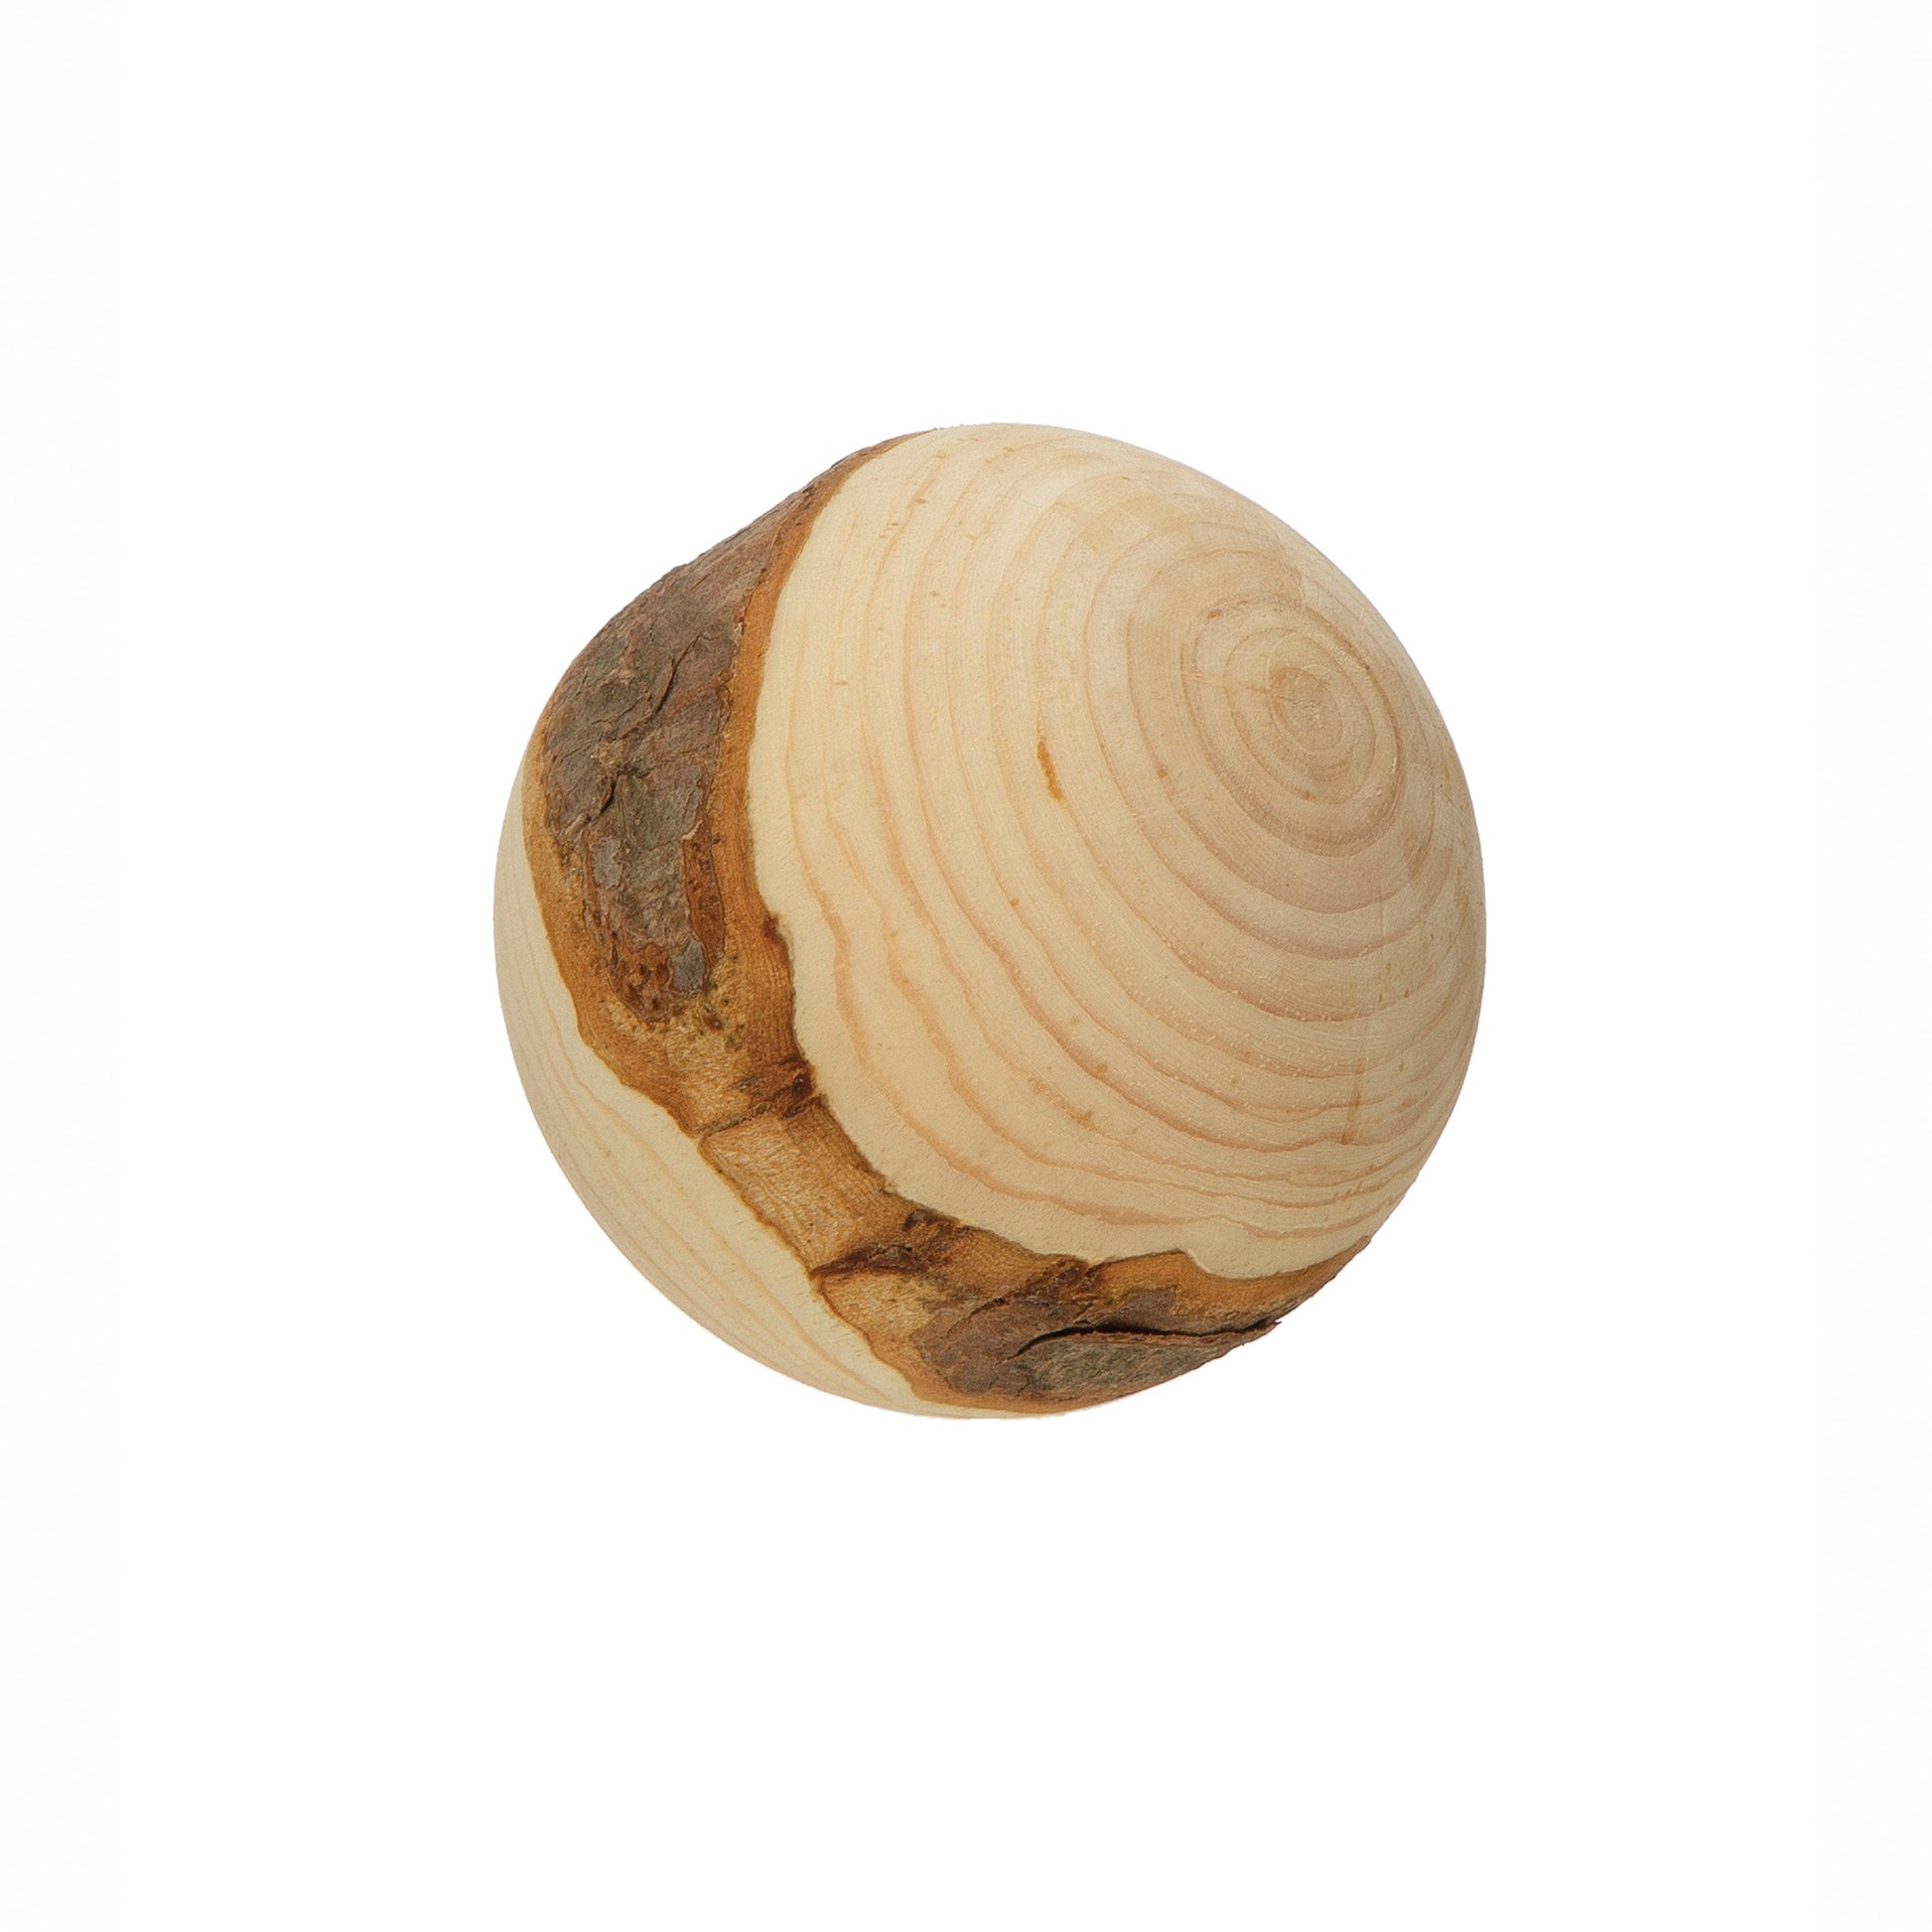 Decorative Wood Ball - Five and Divine